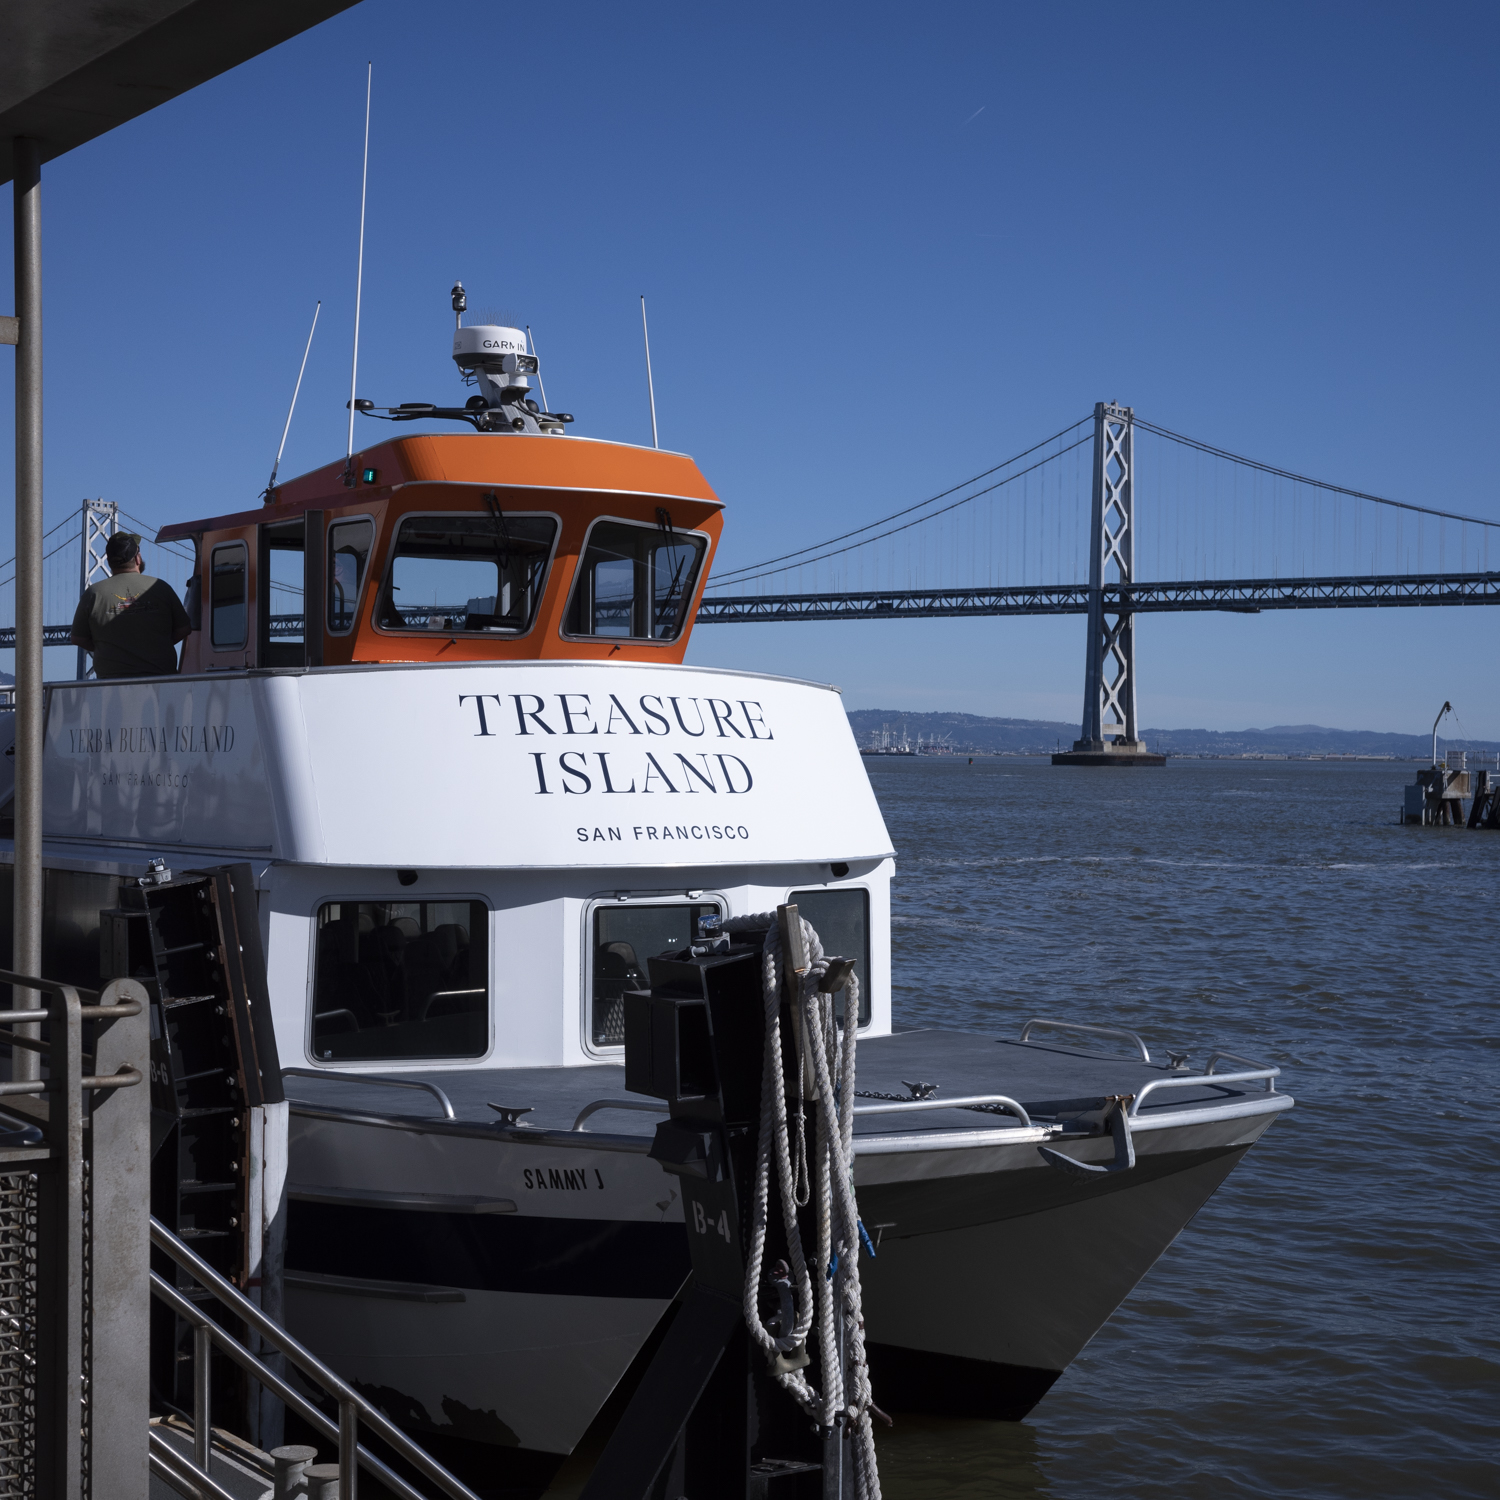 Treasure Island ferry, image by Andrew Campbell Nelson